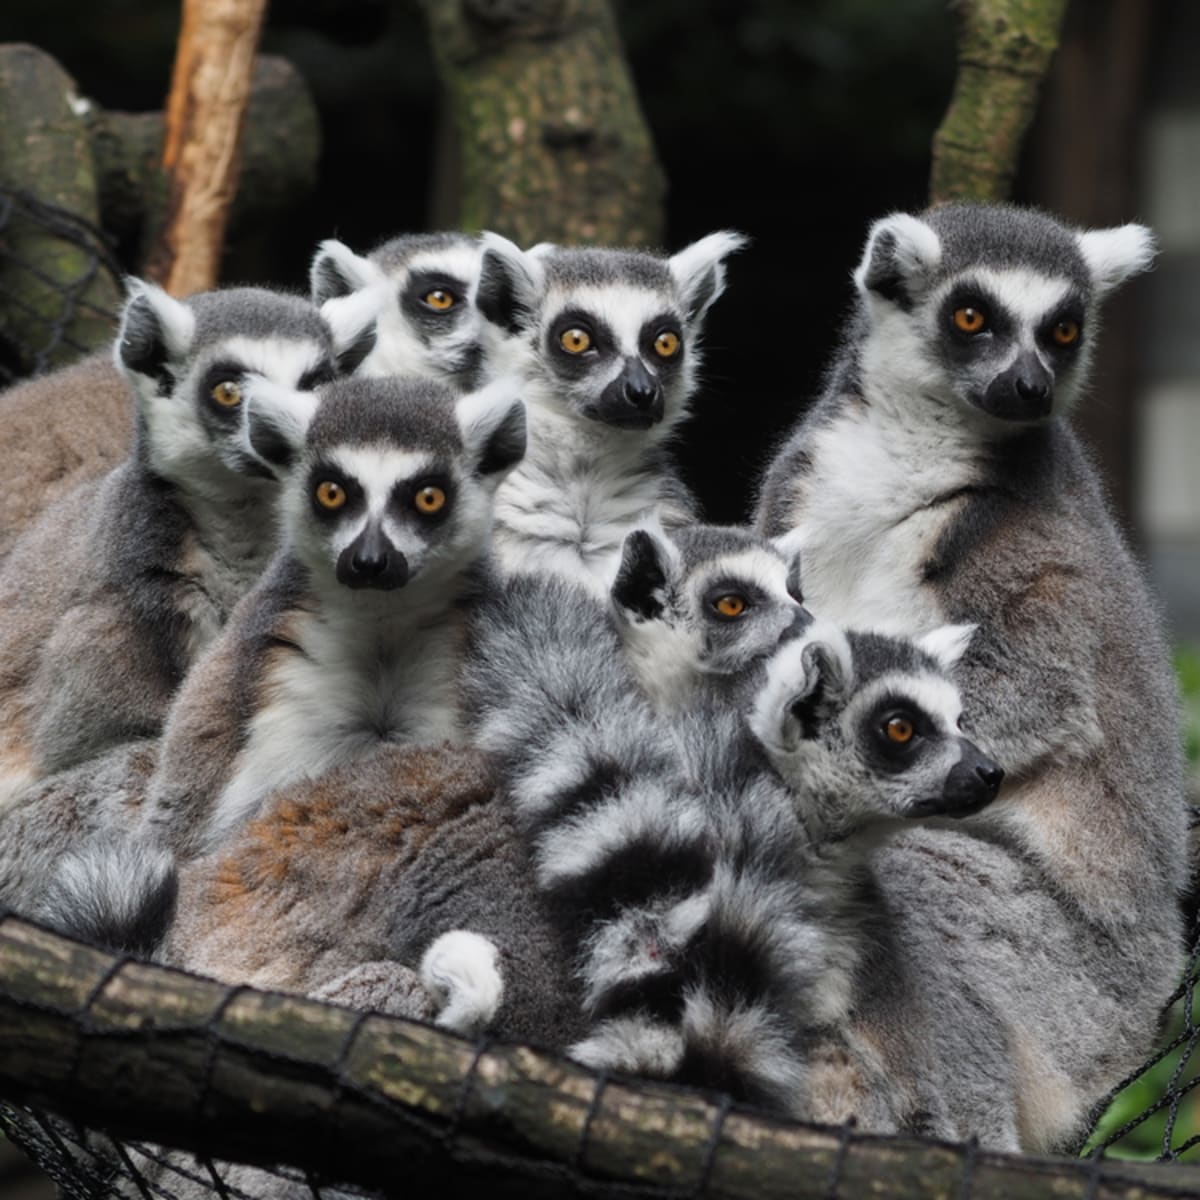 Lemurs Like to Chit-Chat Too - Pacific Standard